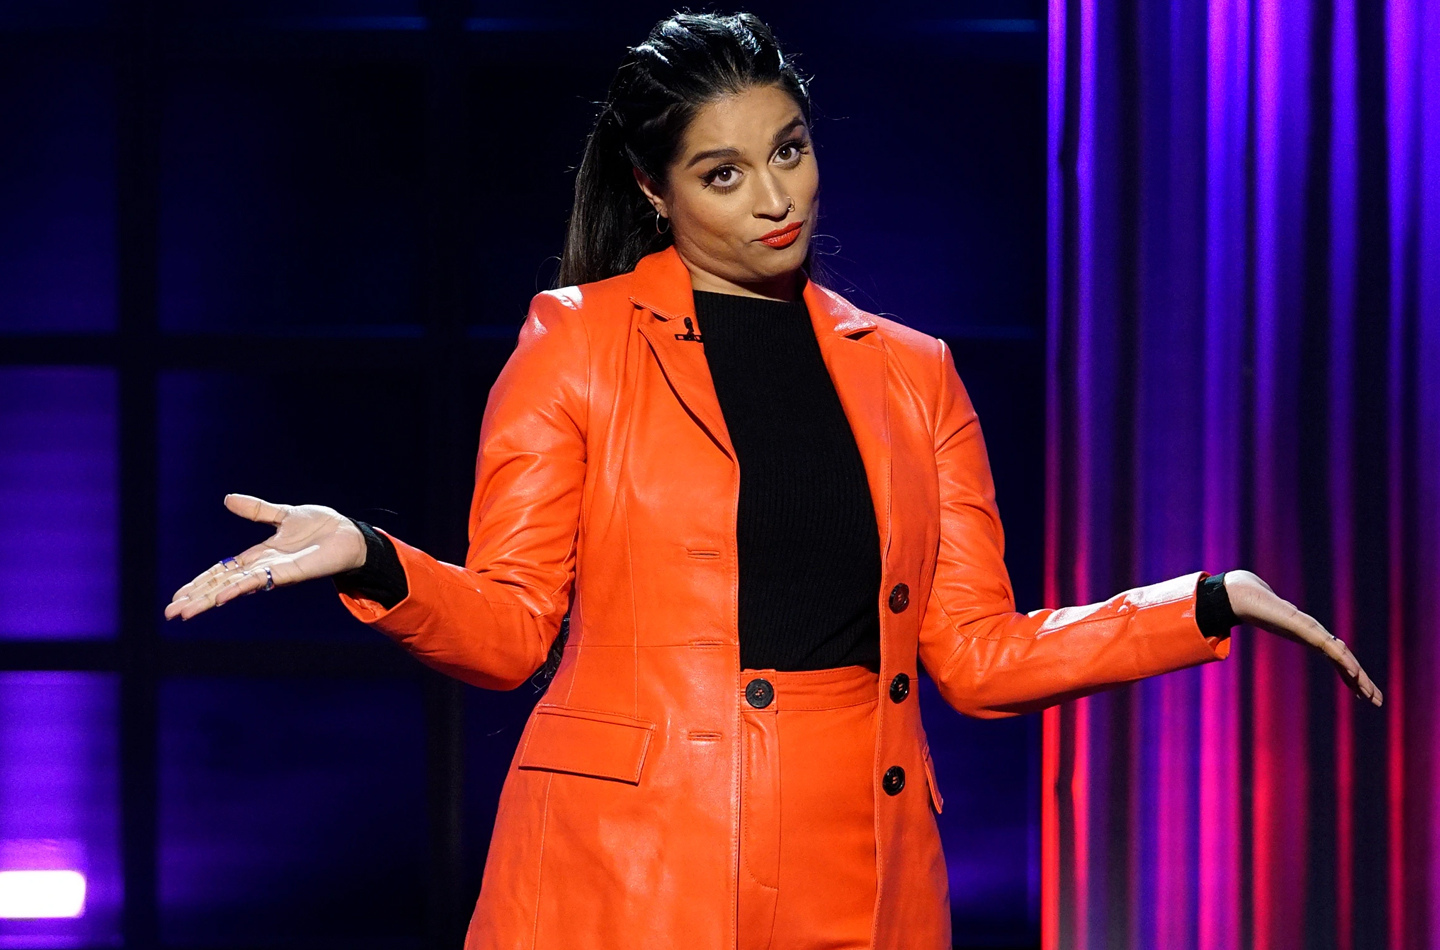 Lilly Singh among Top 30 influencers on internet - Time Magazine